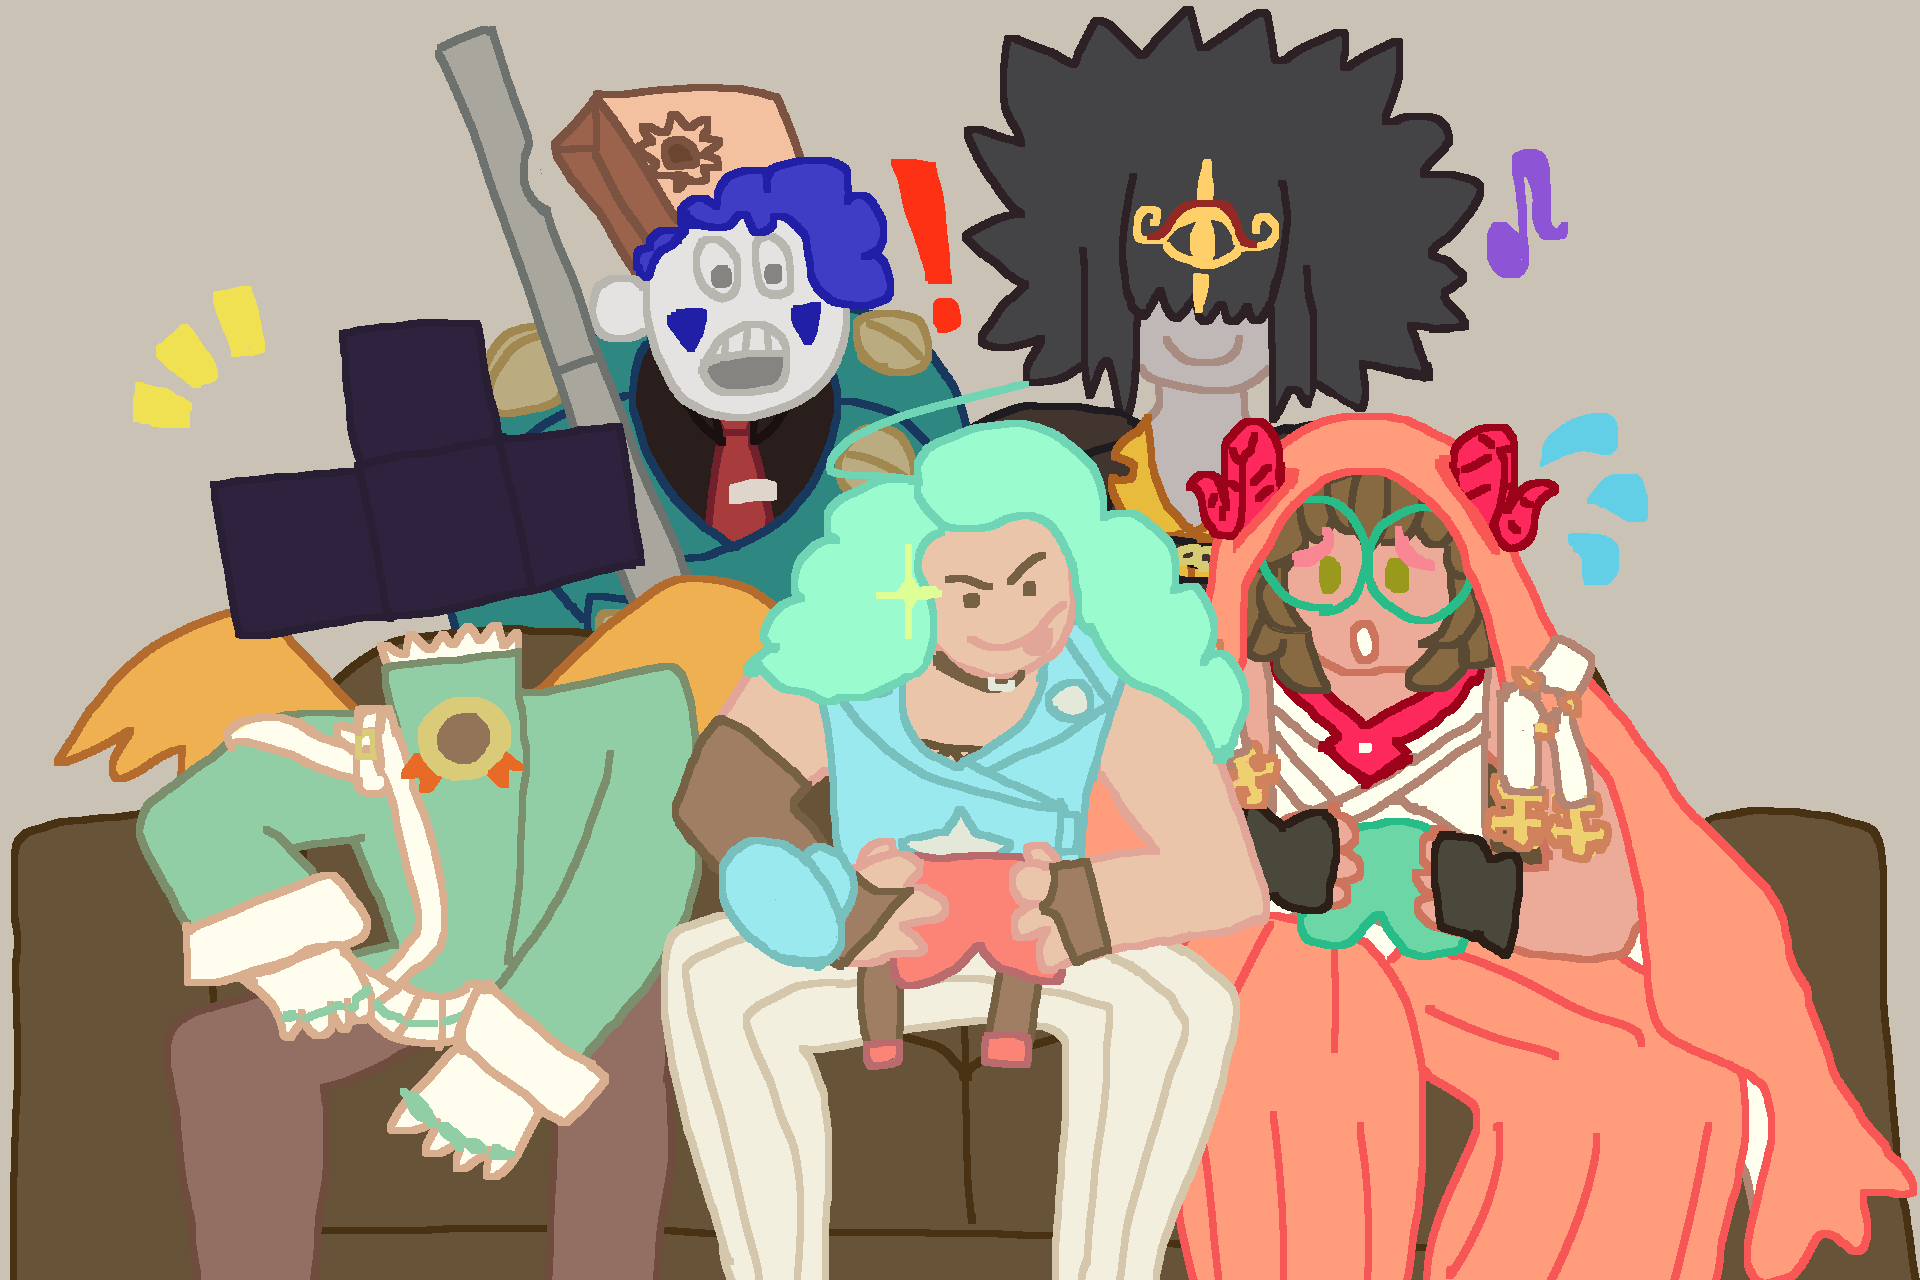 a digital drawing of five people on and behind a couch. from top left to bottm right, they are the sonas of marsupials nick, zag, jay, orion, and smiley. they are all dressed as their guilty gear xrd rev 2 mains, which are faust, venom, millia, chipp, and raven, respectively. orion and smiley are holding controllers, and all are facing the viewer as if they are playing/watching the game ahead of them